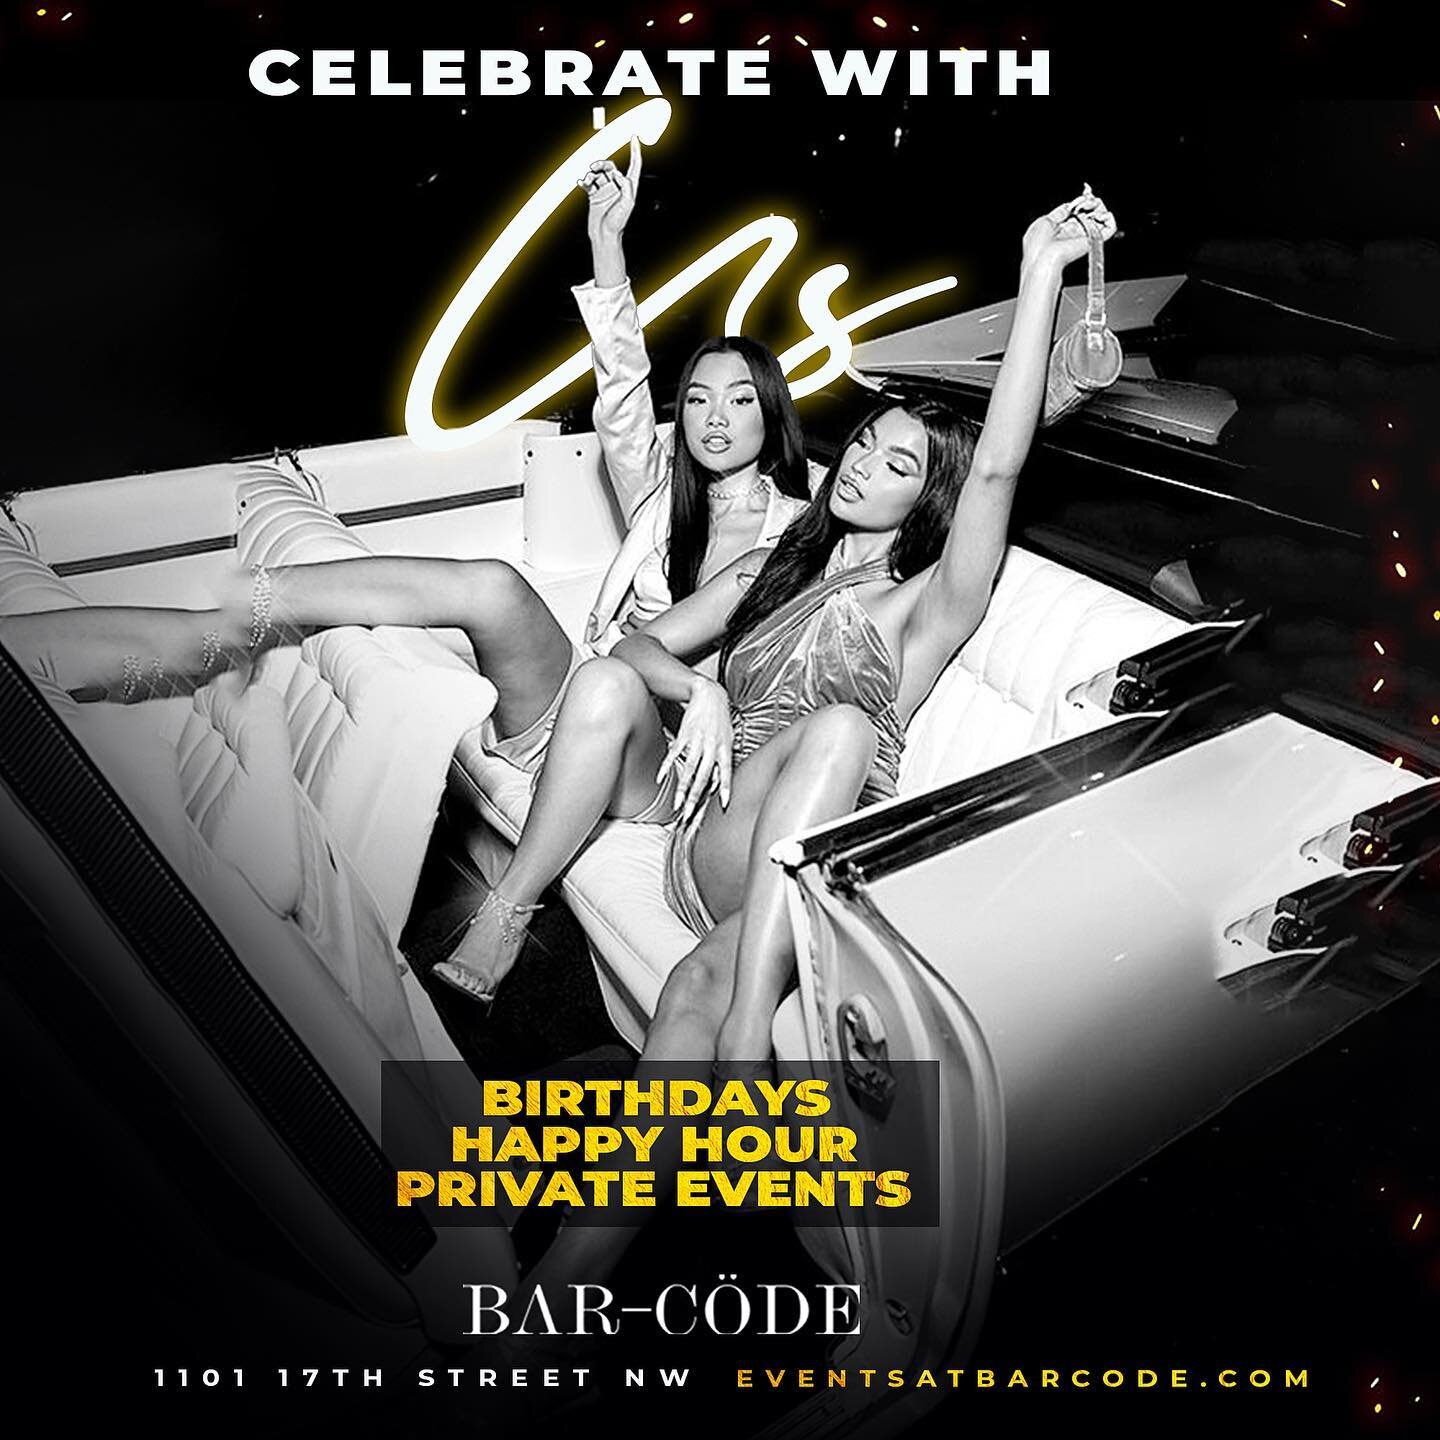 CELEBRATE with Us at @BarcodeDC!

&bull;Birthdays
&bull;Happy Hour
&bull;Private Events

EventsAtBarcode.com or egoentgroup.com

#BarcodeFridays #BarcodeSatBrunch #BarcodeSaturdays #BarcodeSundays